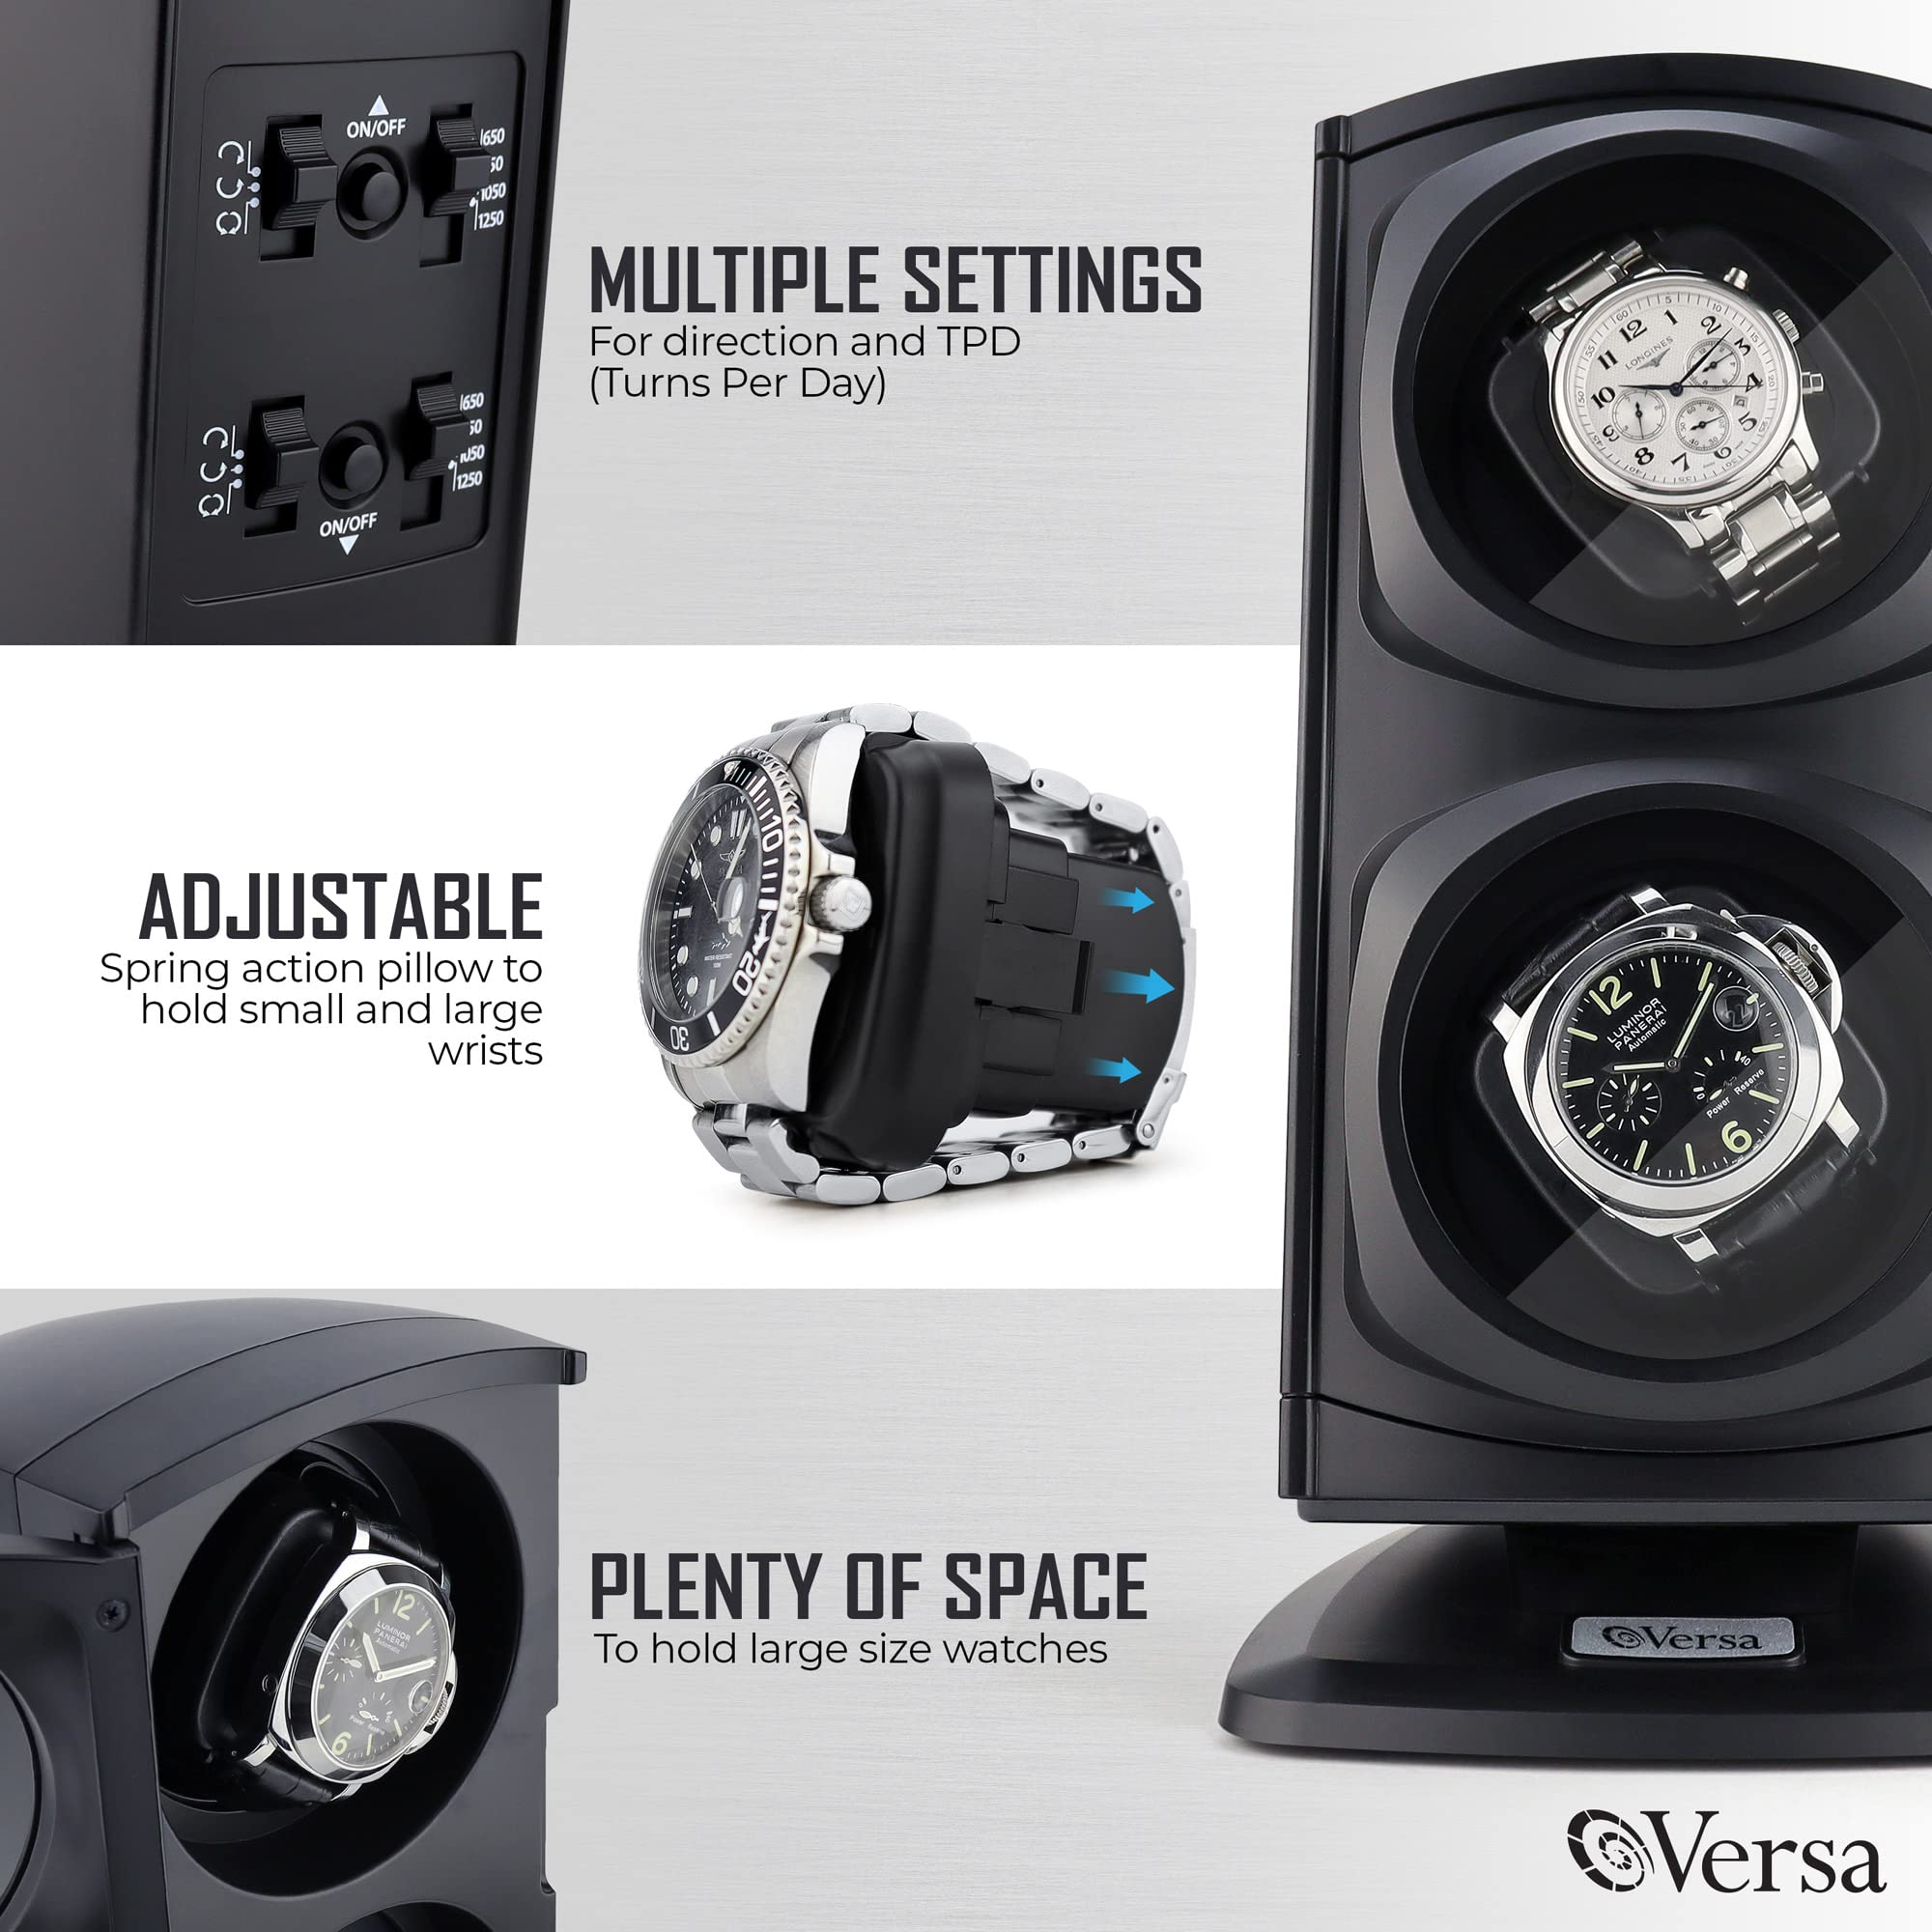 Versa [Newly Upgraded] Automatic Double Watch Winder in Black - New Direct Drive Motor, Independently Controlled Settings, 12 Different Settings, Adjustable Watch Pillows - No Magnets